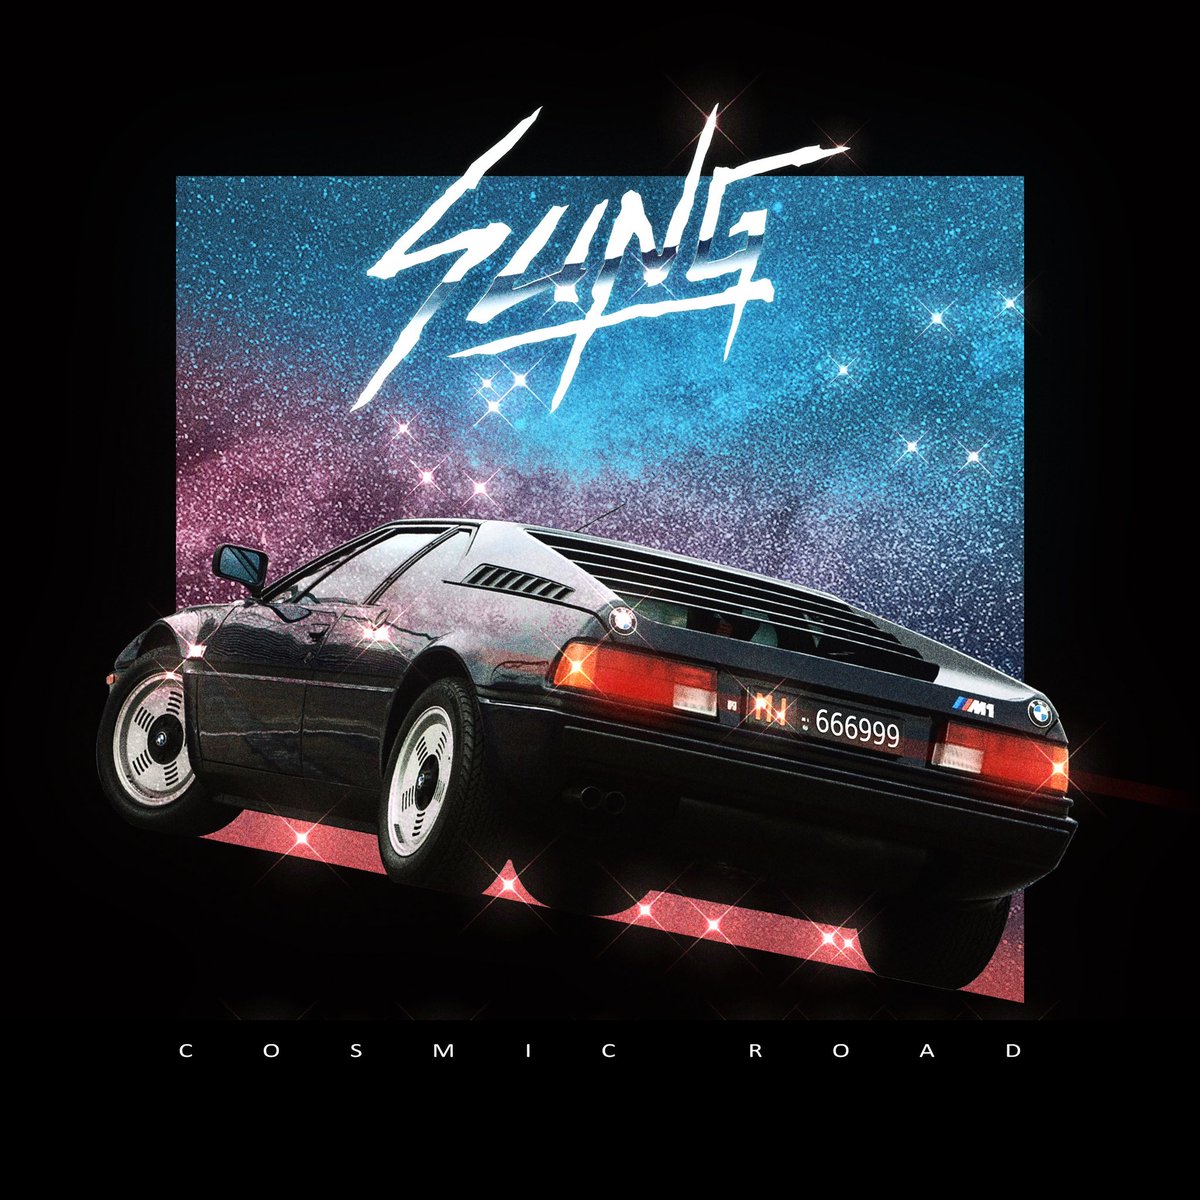 ✨Cosmic Road ✨ new single out 2022.07.22 this friday on all streaming platforms ! Currently working on a new EP as well. As always, thank you for your support 🙏

#sung #synthwave #outrun #cosmicroad #retrovibes #80svibes #analoguevibes #80scars #retroaesthetic #synths